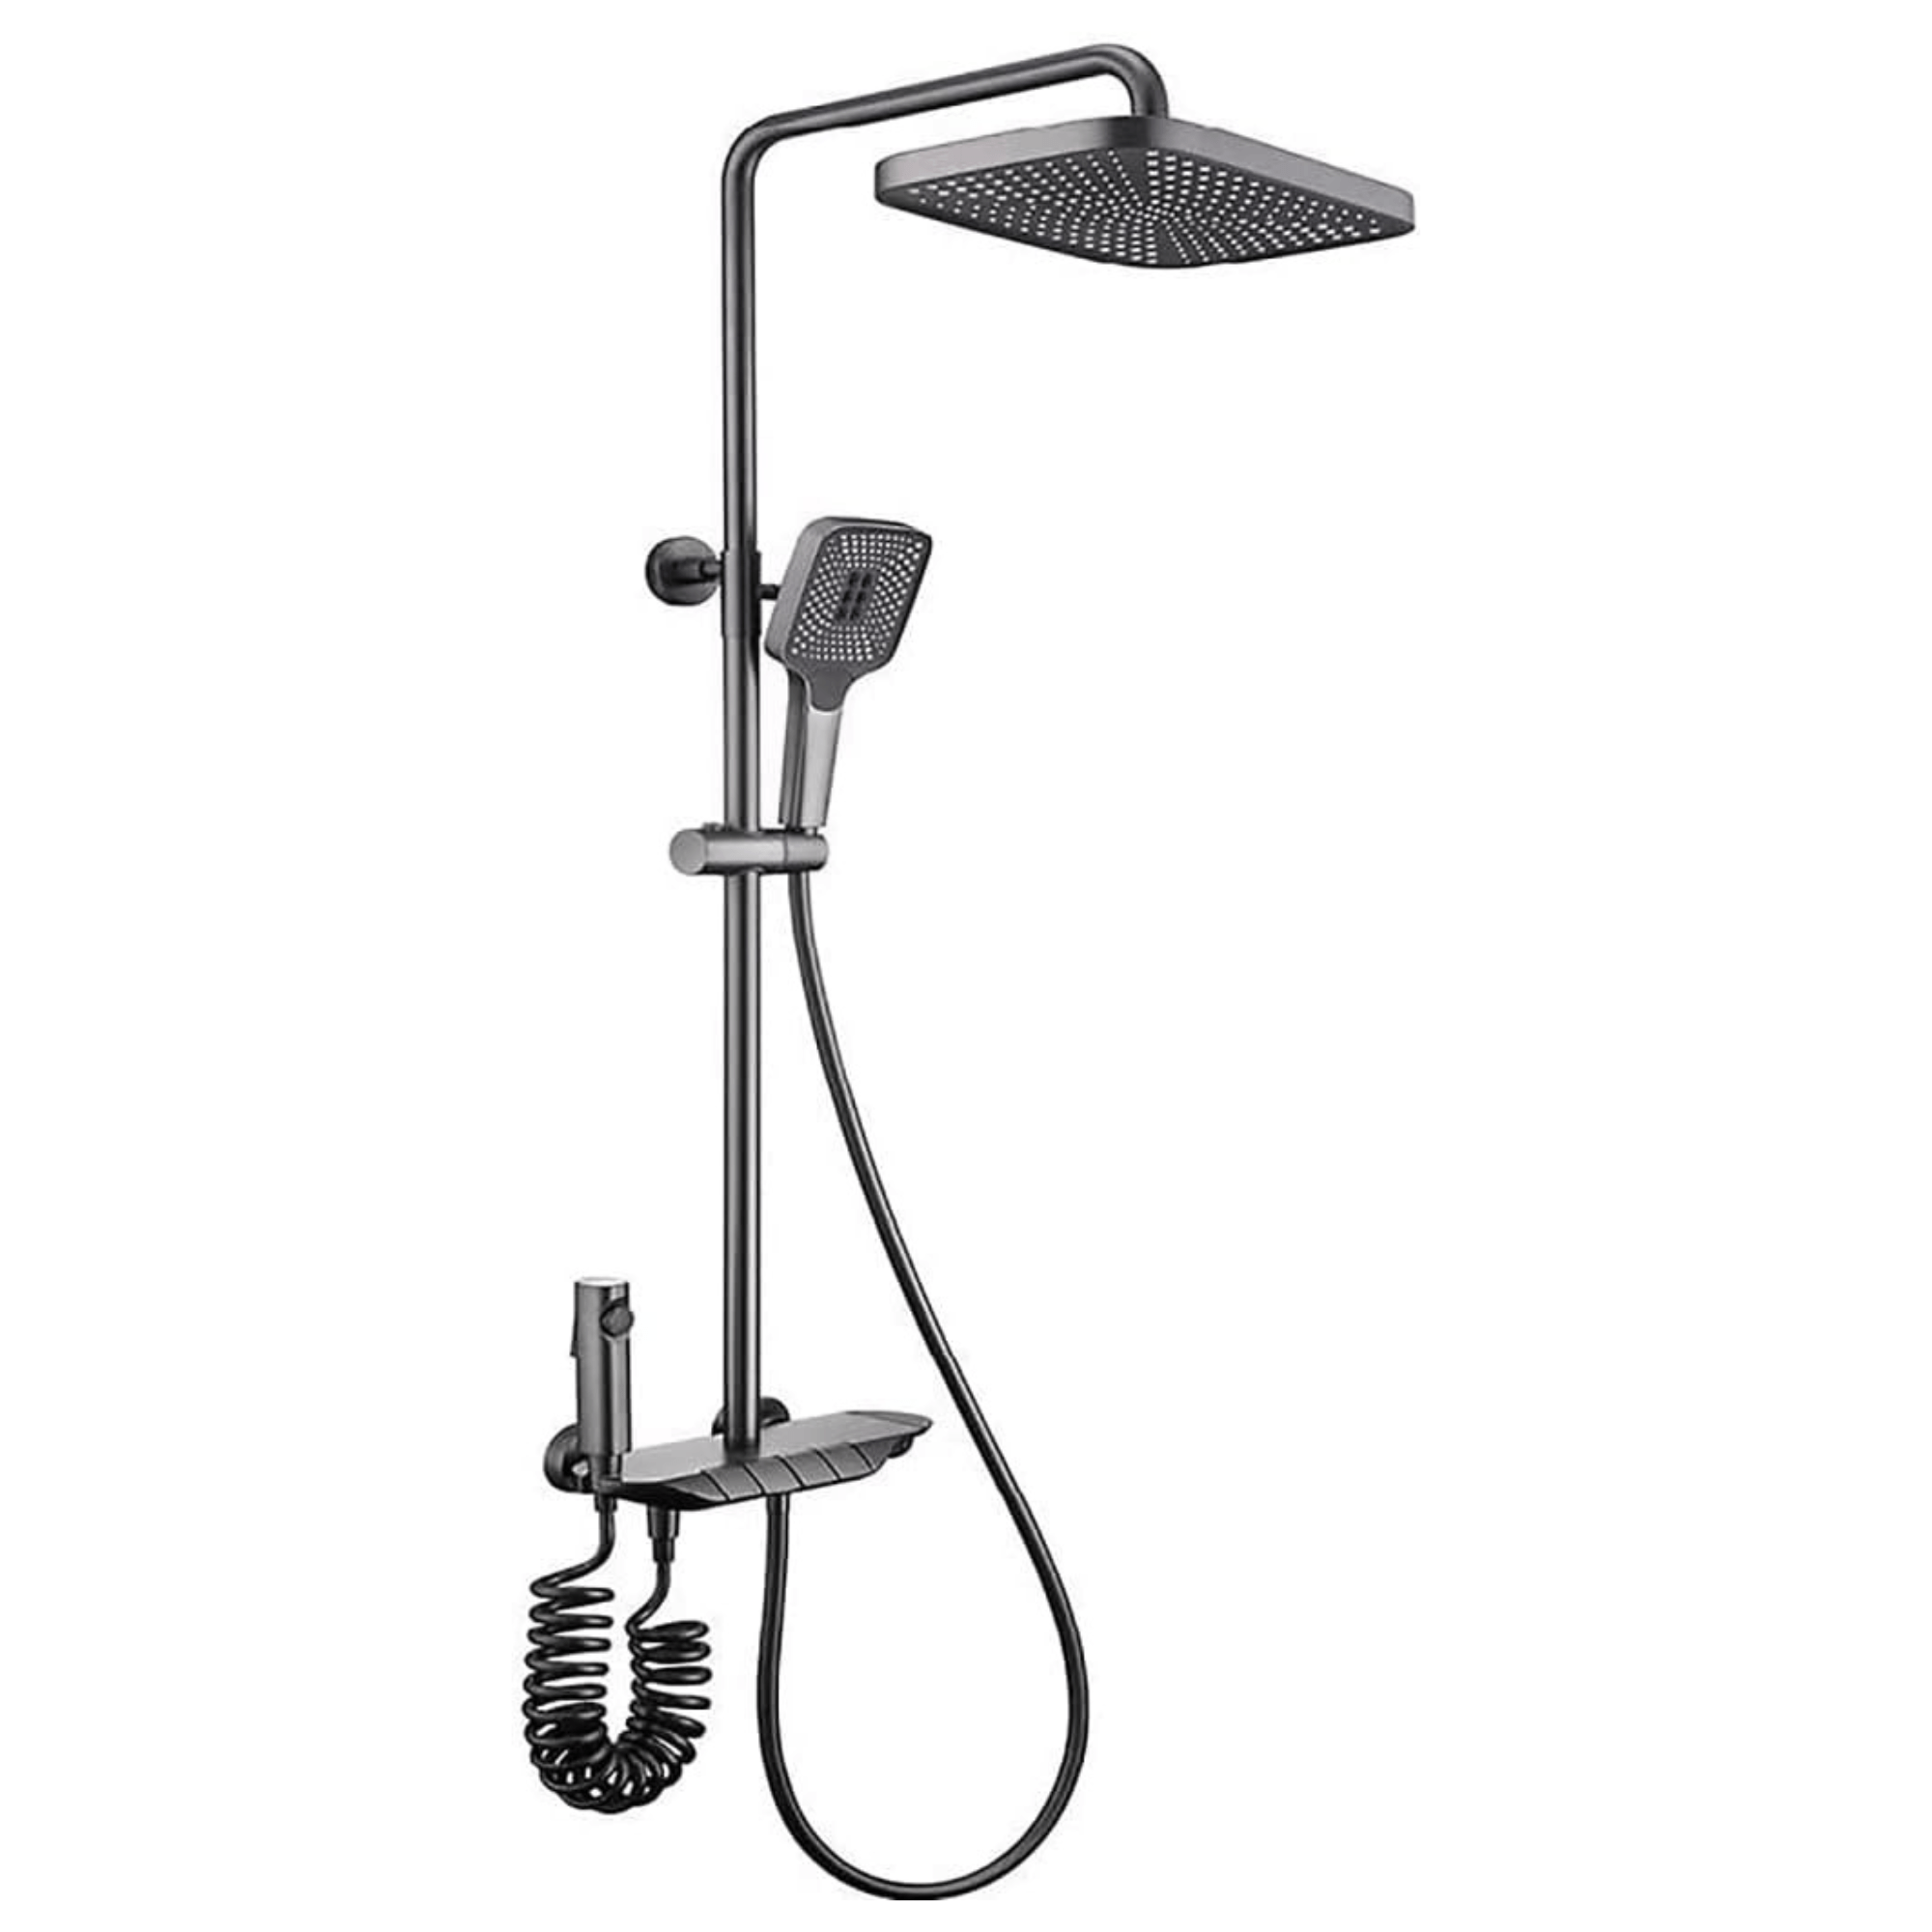 Buy Bathroom Concealed Wall Mounted Two-Function Square Overhead Rain Shower Set Chrome/Matte Black - RS-9003 & RS-9003B | Shop at Supply Master Accra, Ghana Shower Set Buy Tools hardware Building materials